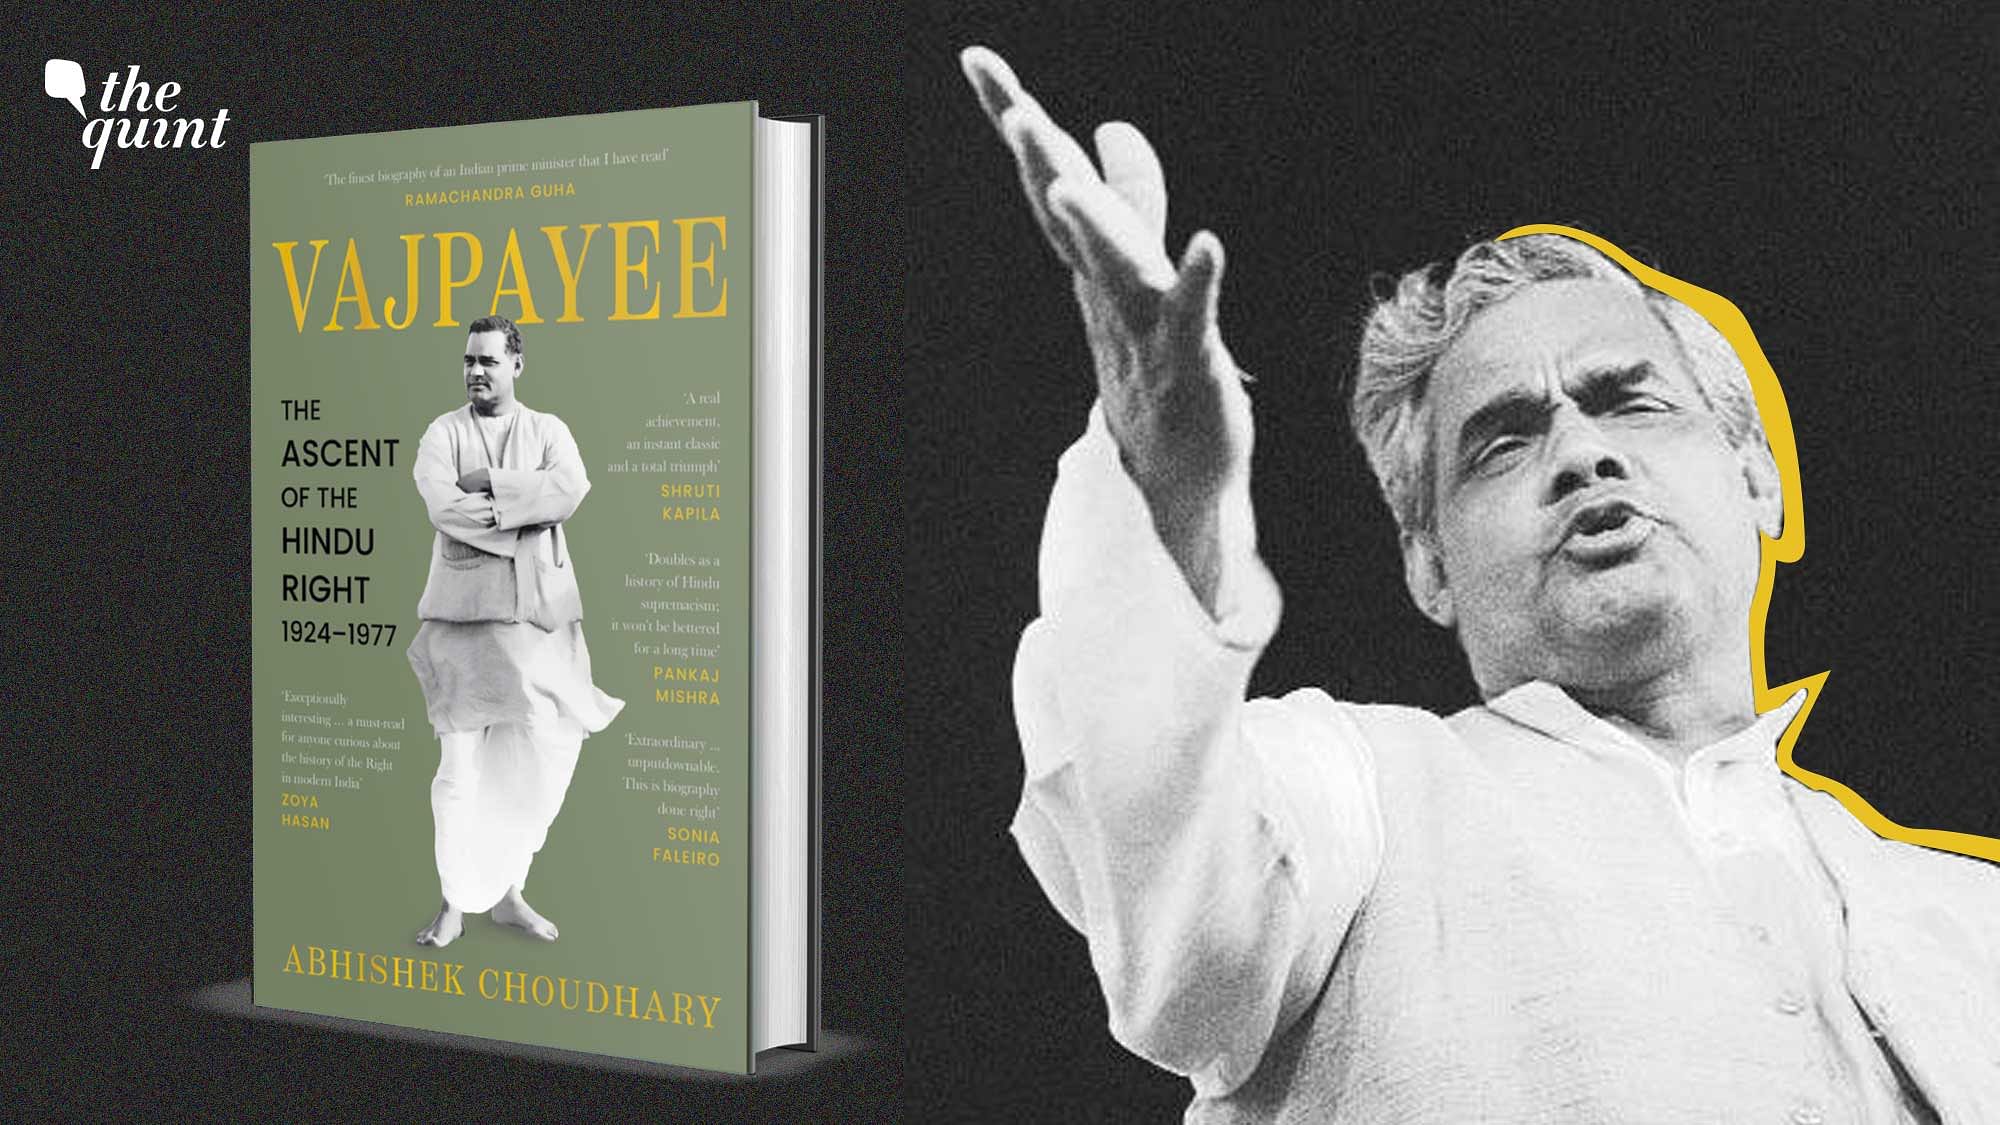 <div class="paragraphs"><p>The cover of Abhishek Choudhary's biography of Vajpayee.&nbsp;</p></div>